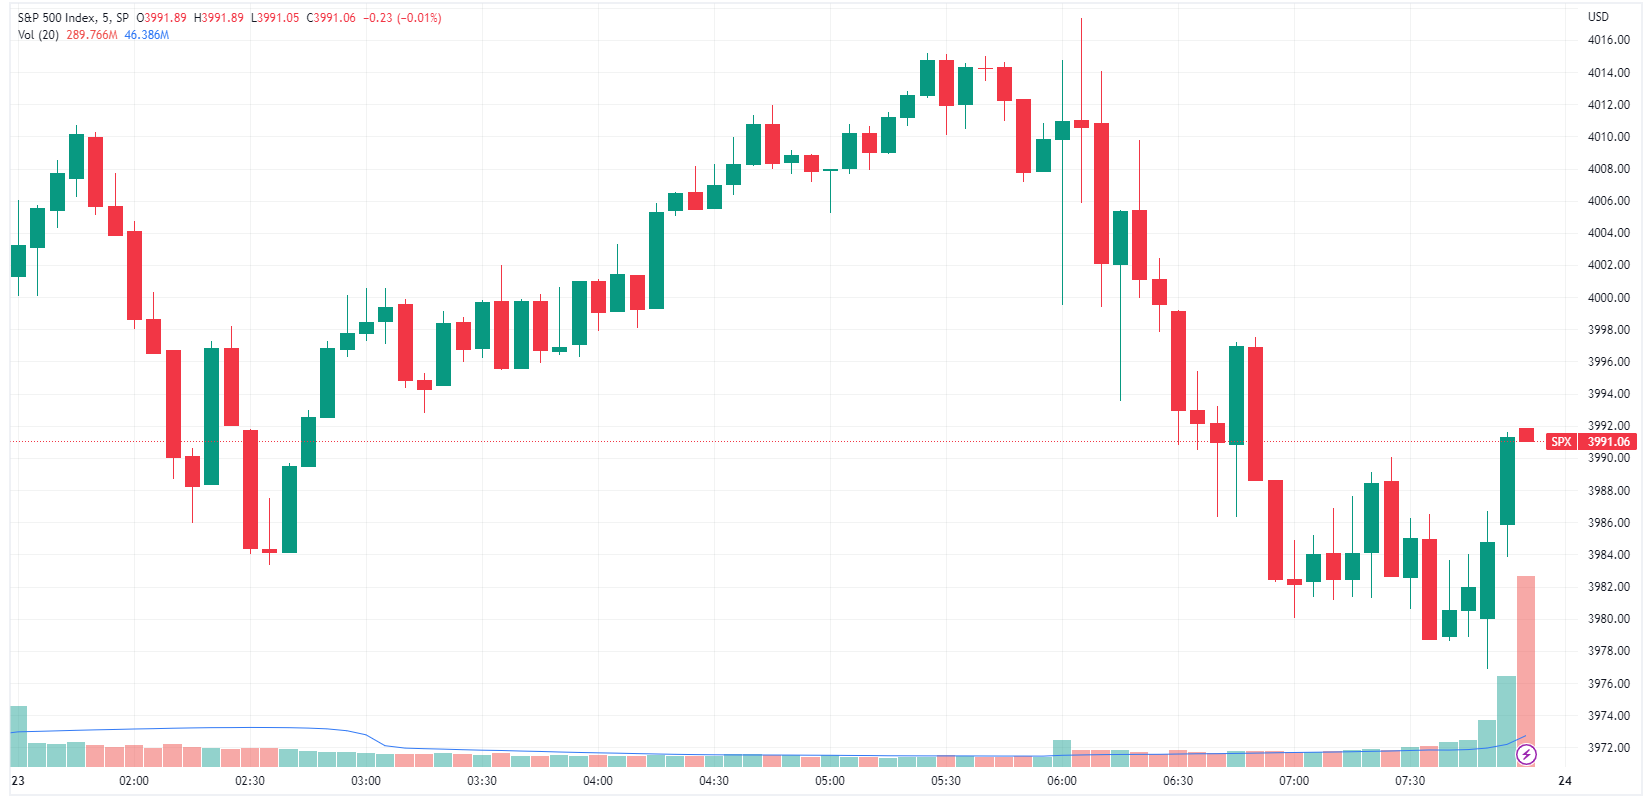 S&P 500 opens higher but slumps on Fed minutes, down for a fourth consecutive session (Source: TradingView)